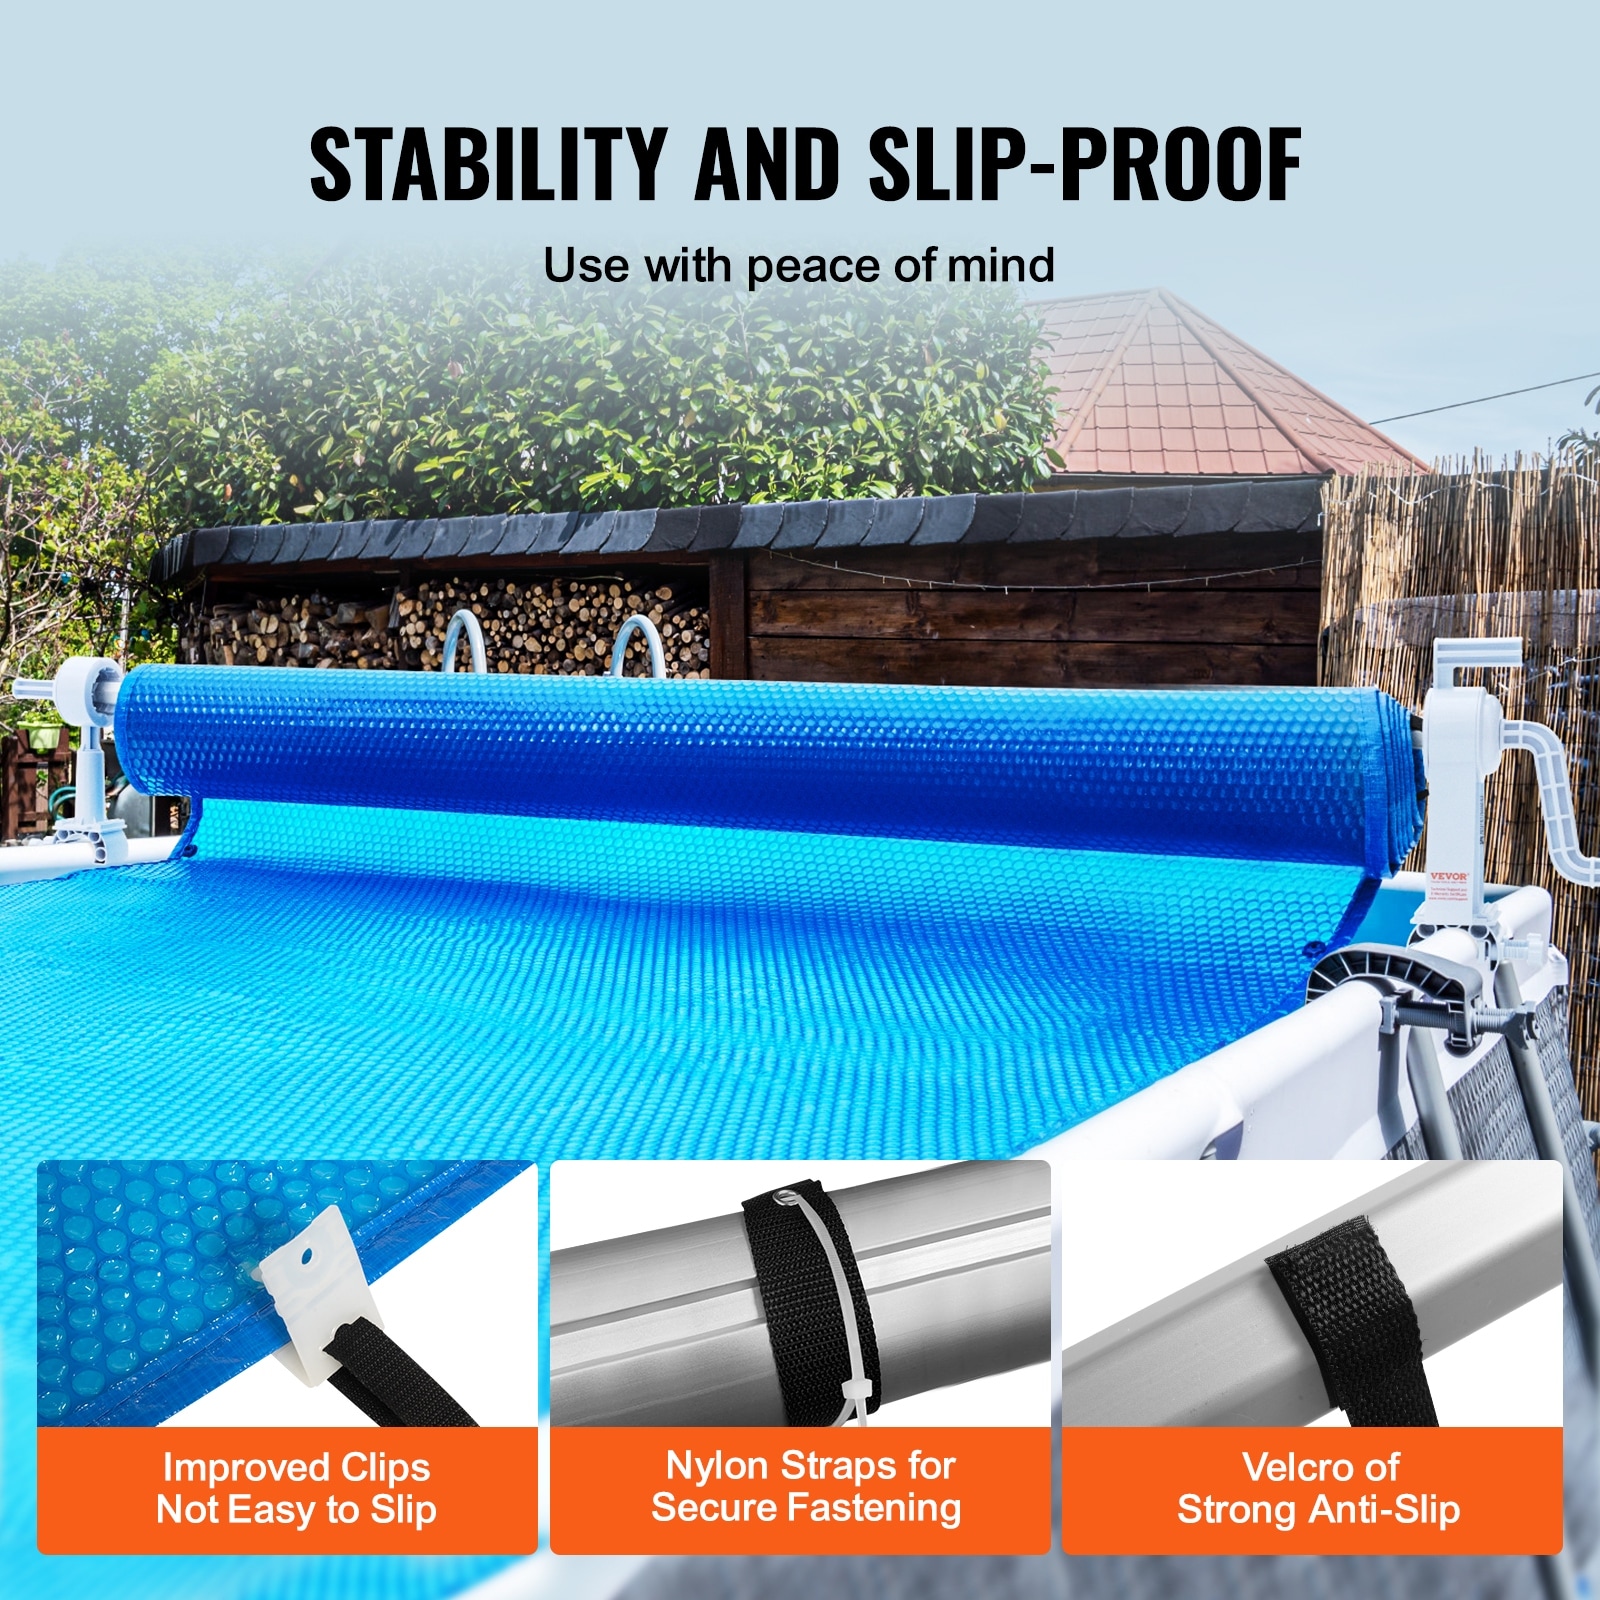 VEVOR Pool Cover Reel, Aluminum Solar Cover Reel 14 ft, Inground Swimming Pool Cover Reel Set with Rubber Wheels and Sandbags, Fits for 3-14 ft